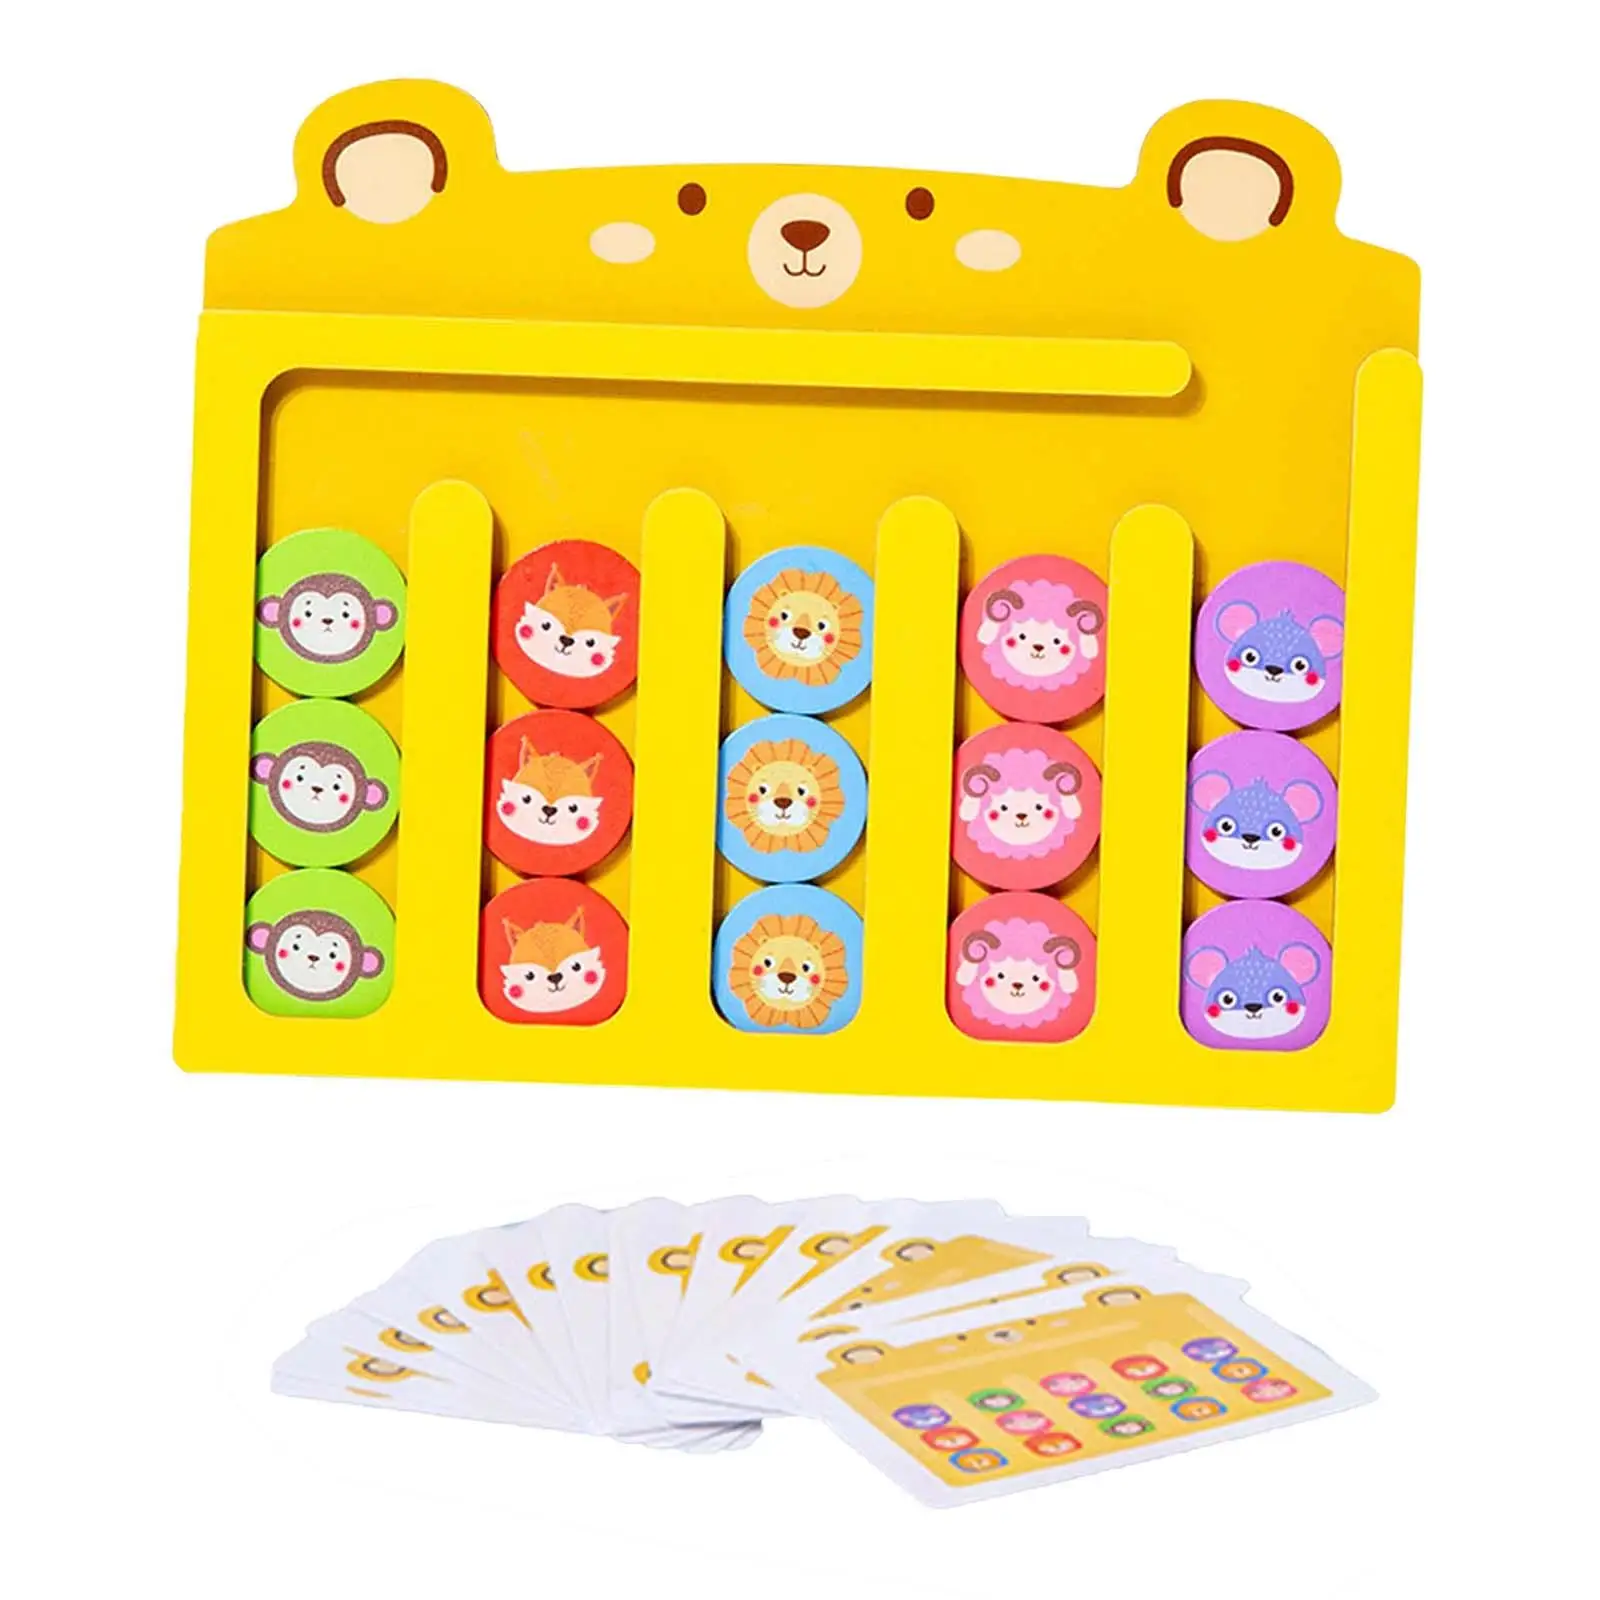 Slide Puzzle Color shape and Color Matching Puzzle for Sorting Colors and Shapes Sliding Puzzle Toy